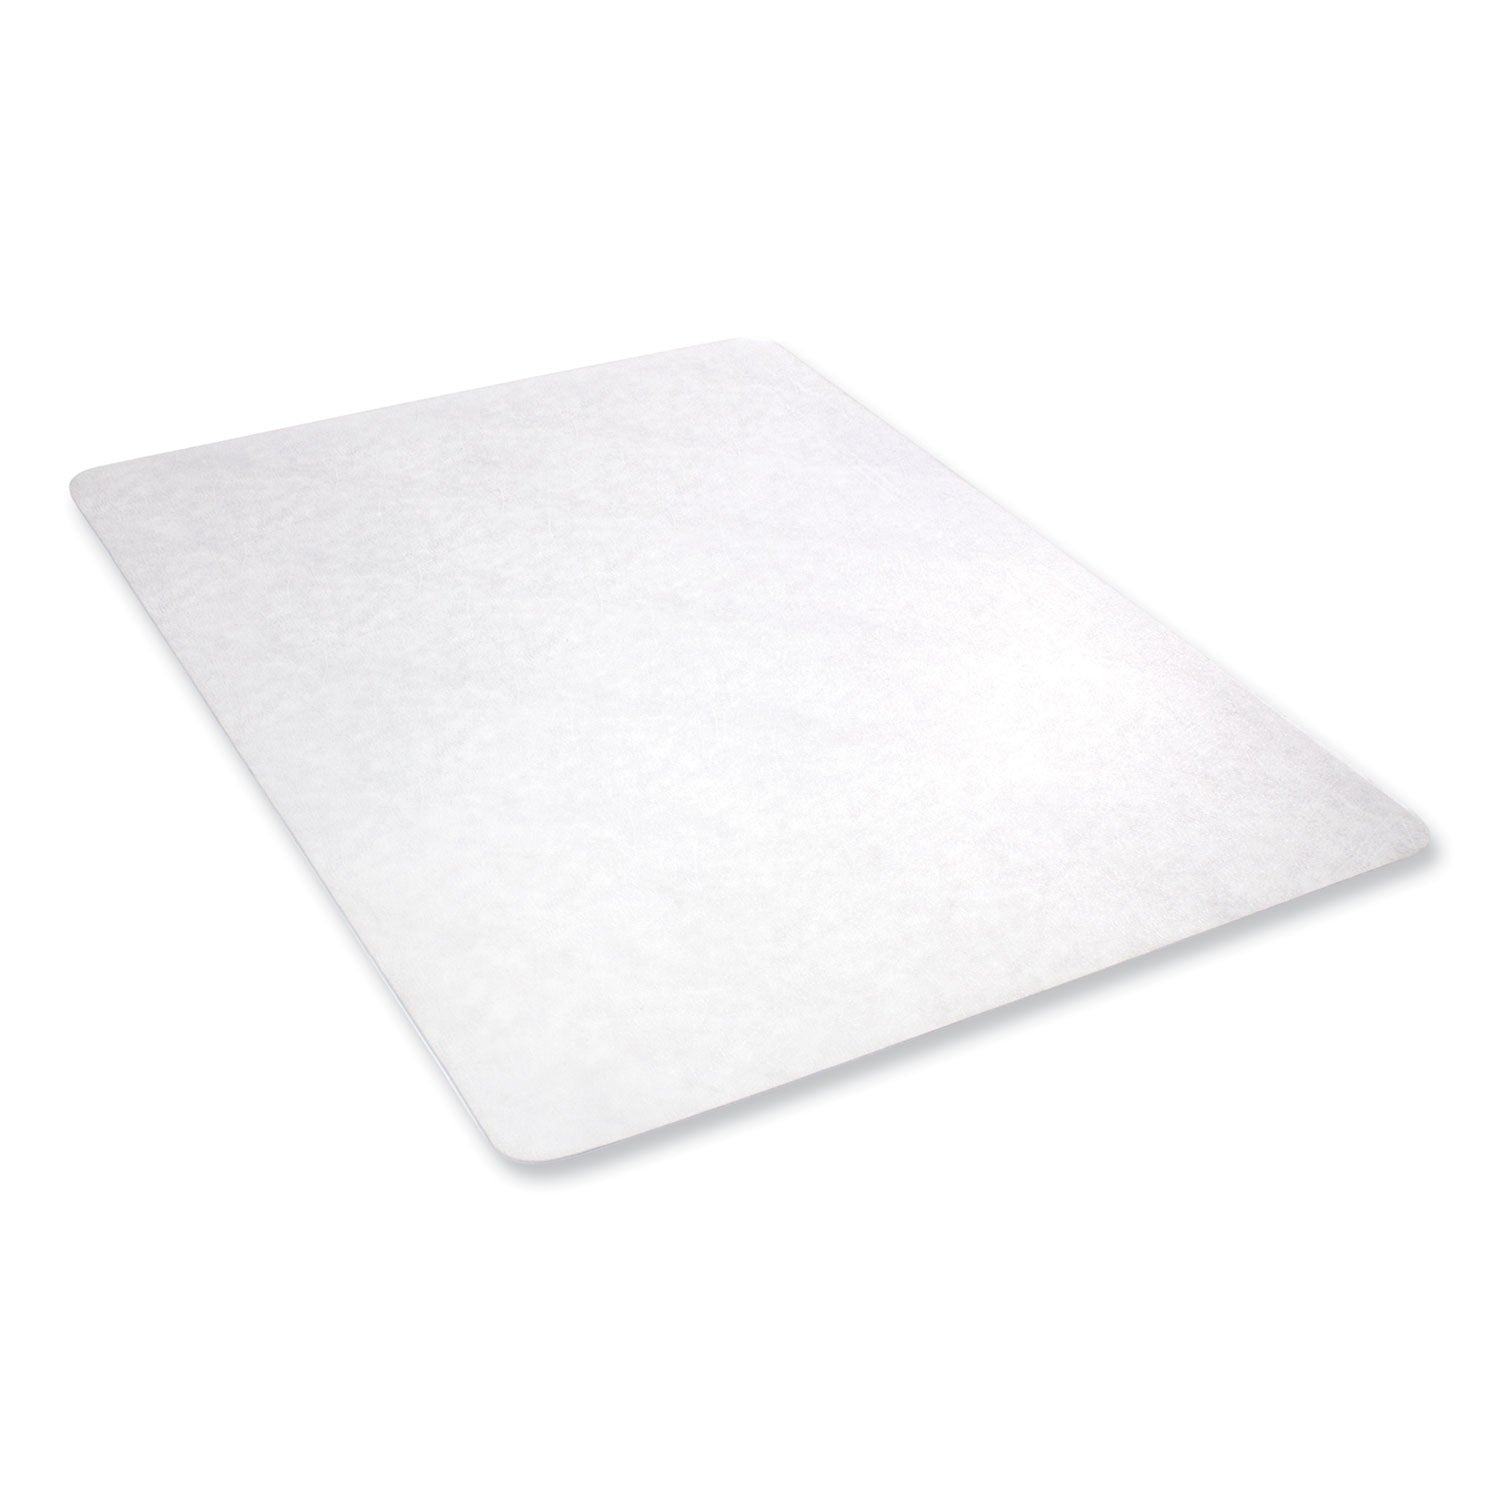 economat-all-day-use-chair-mat-for-hard-floors-flat-packed-36-x-48-clear_defcm2e142 - 1